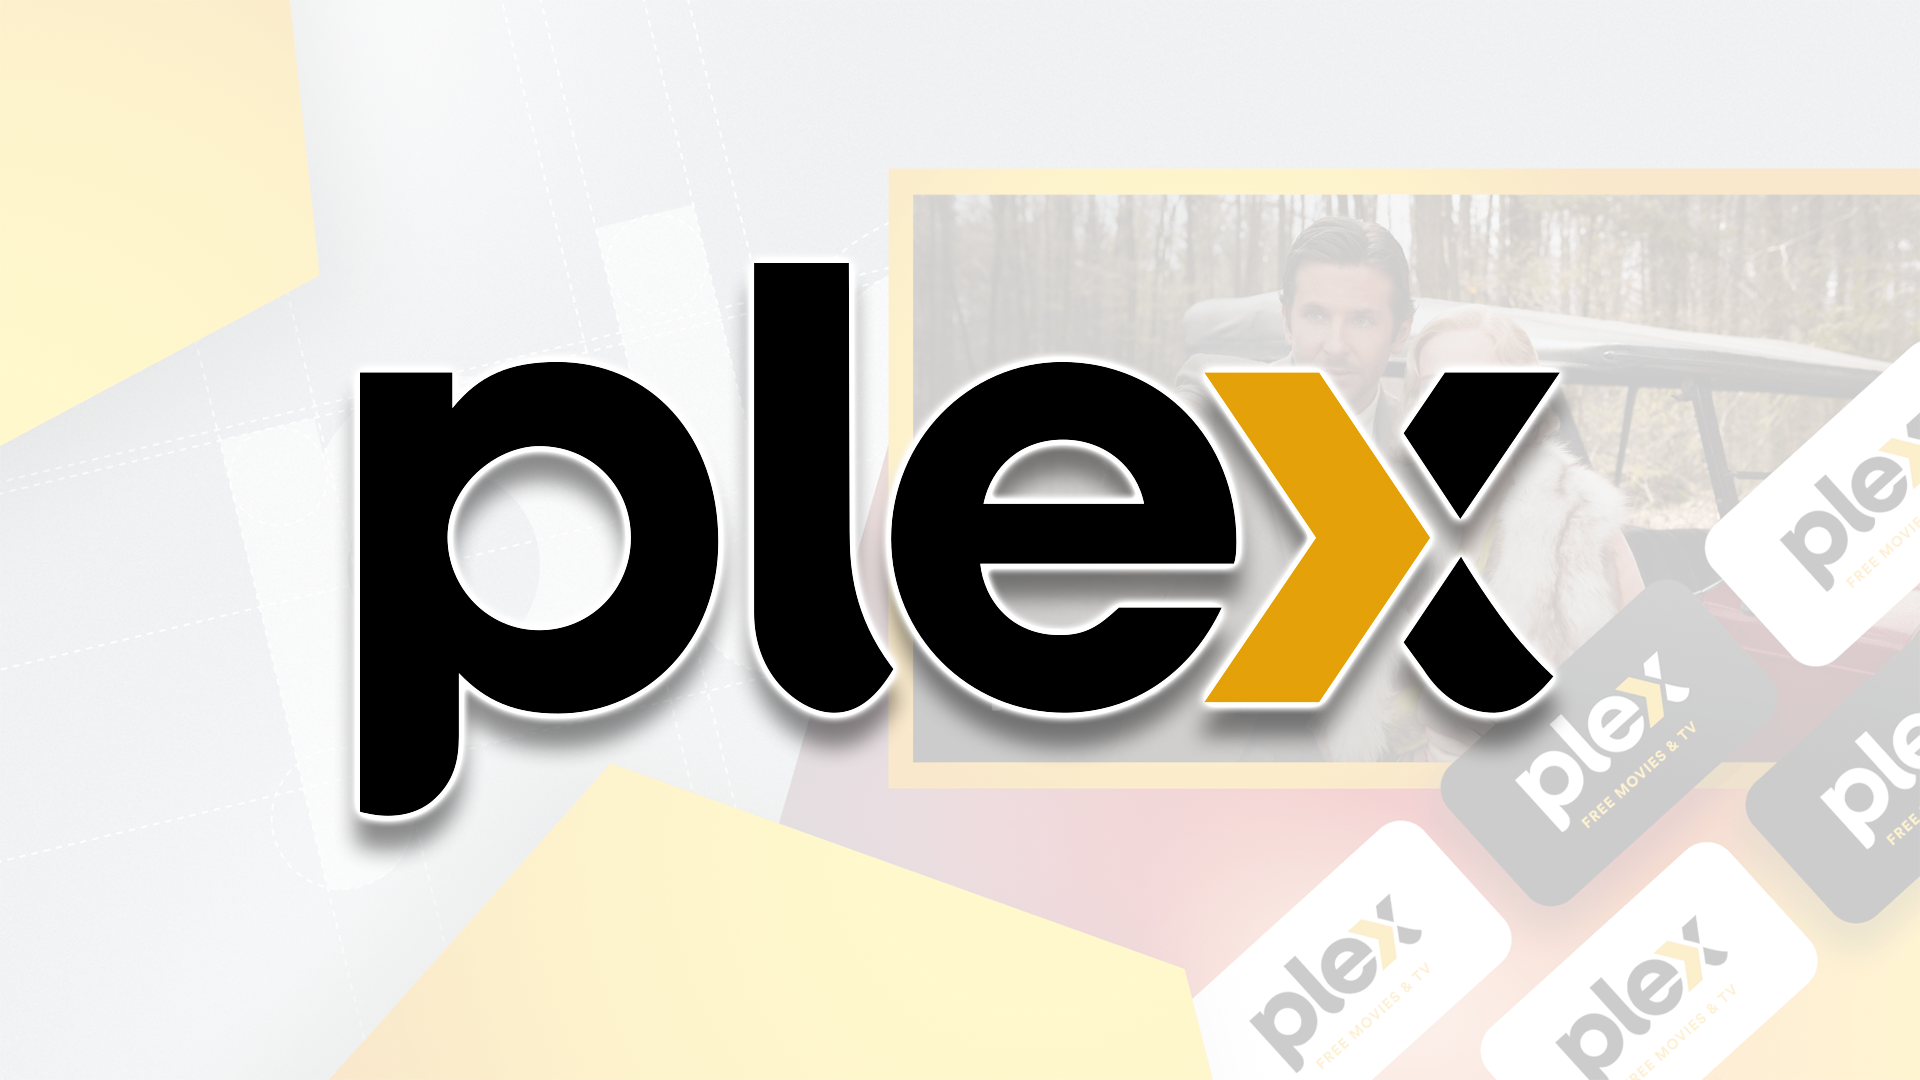 The Plex logo over a colorful background.